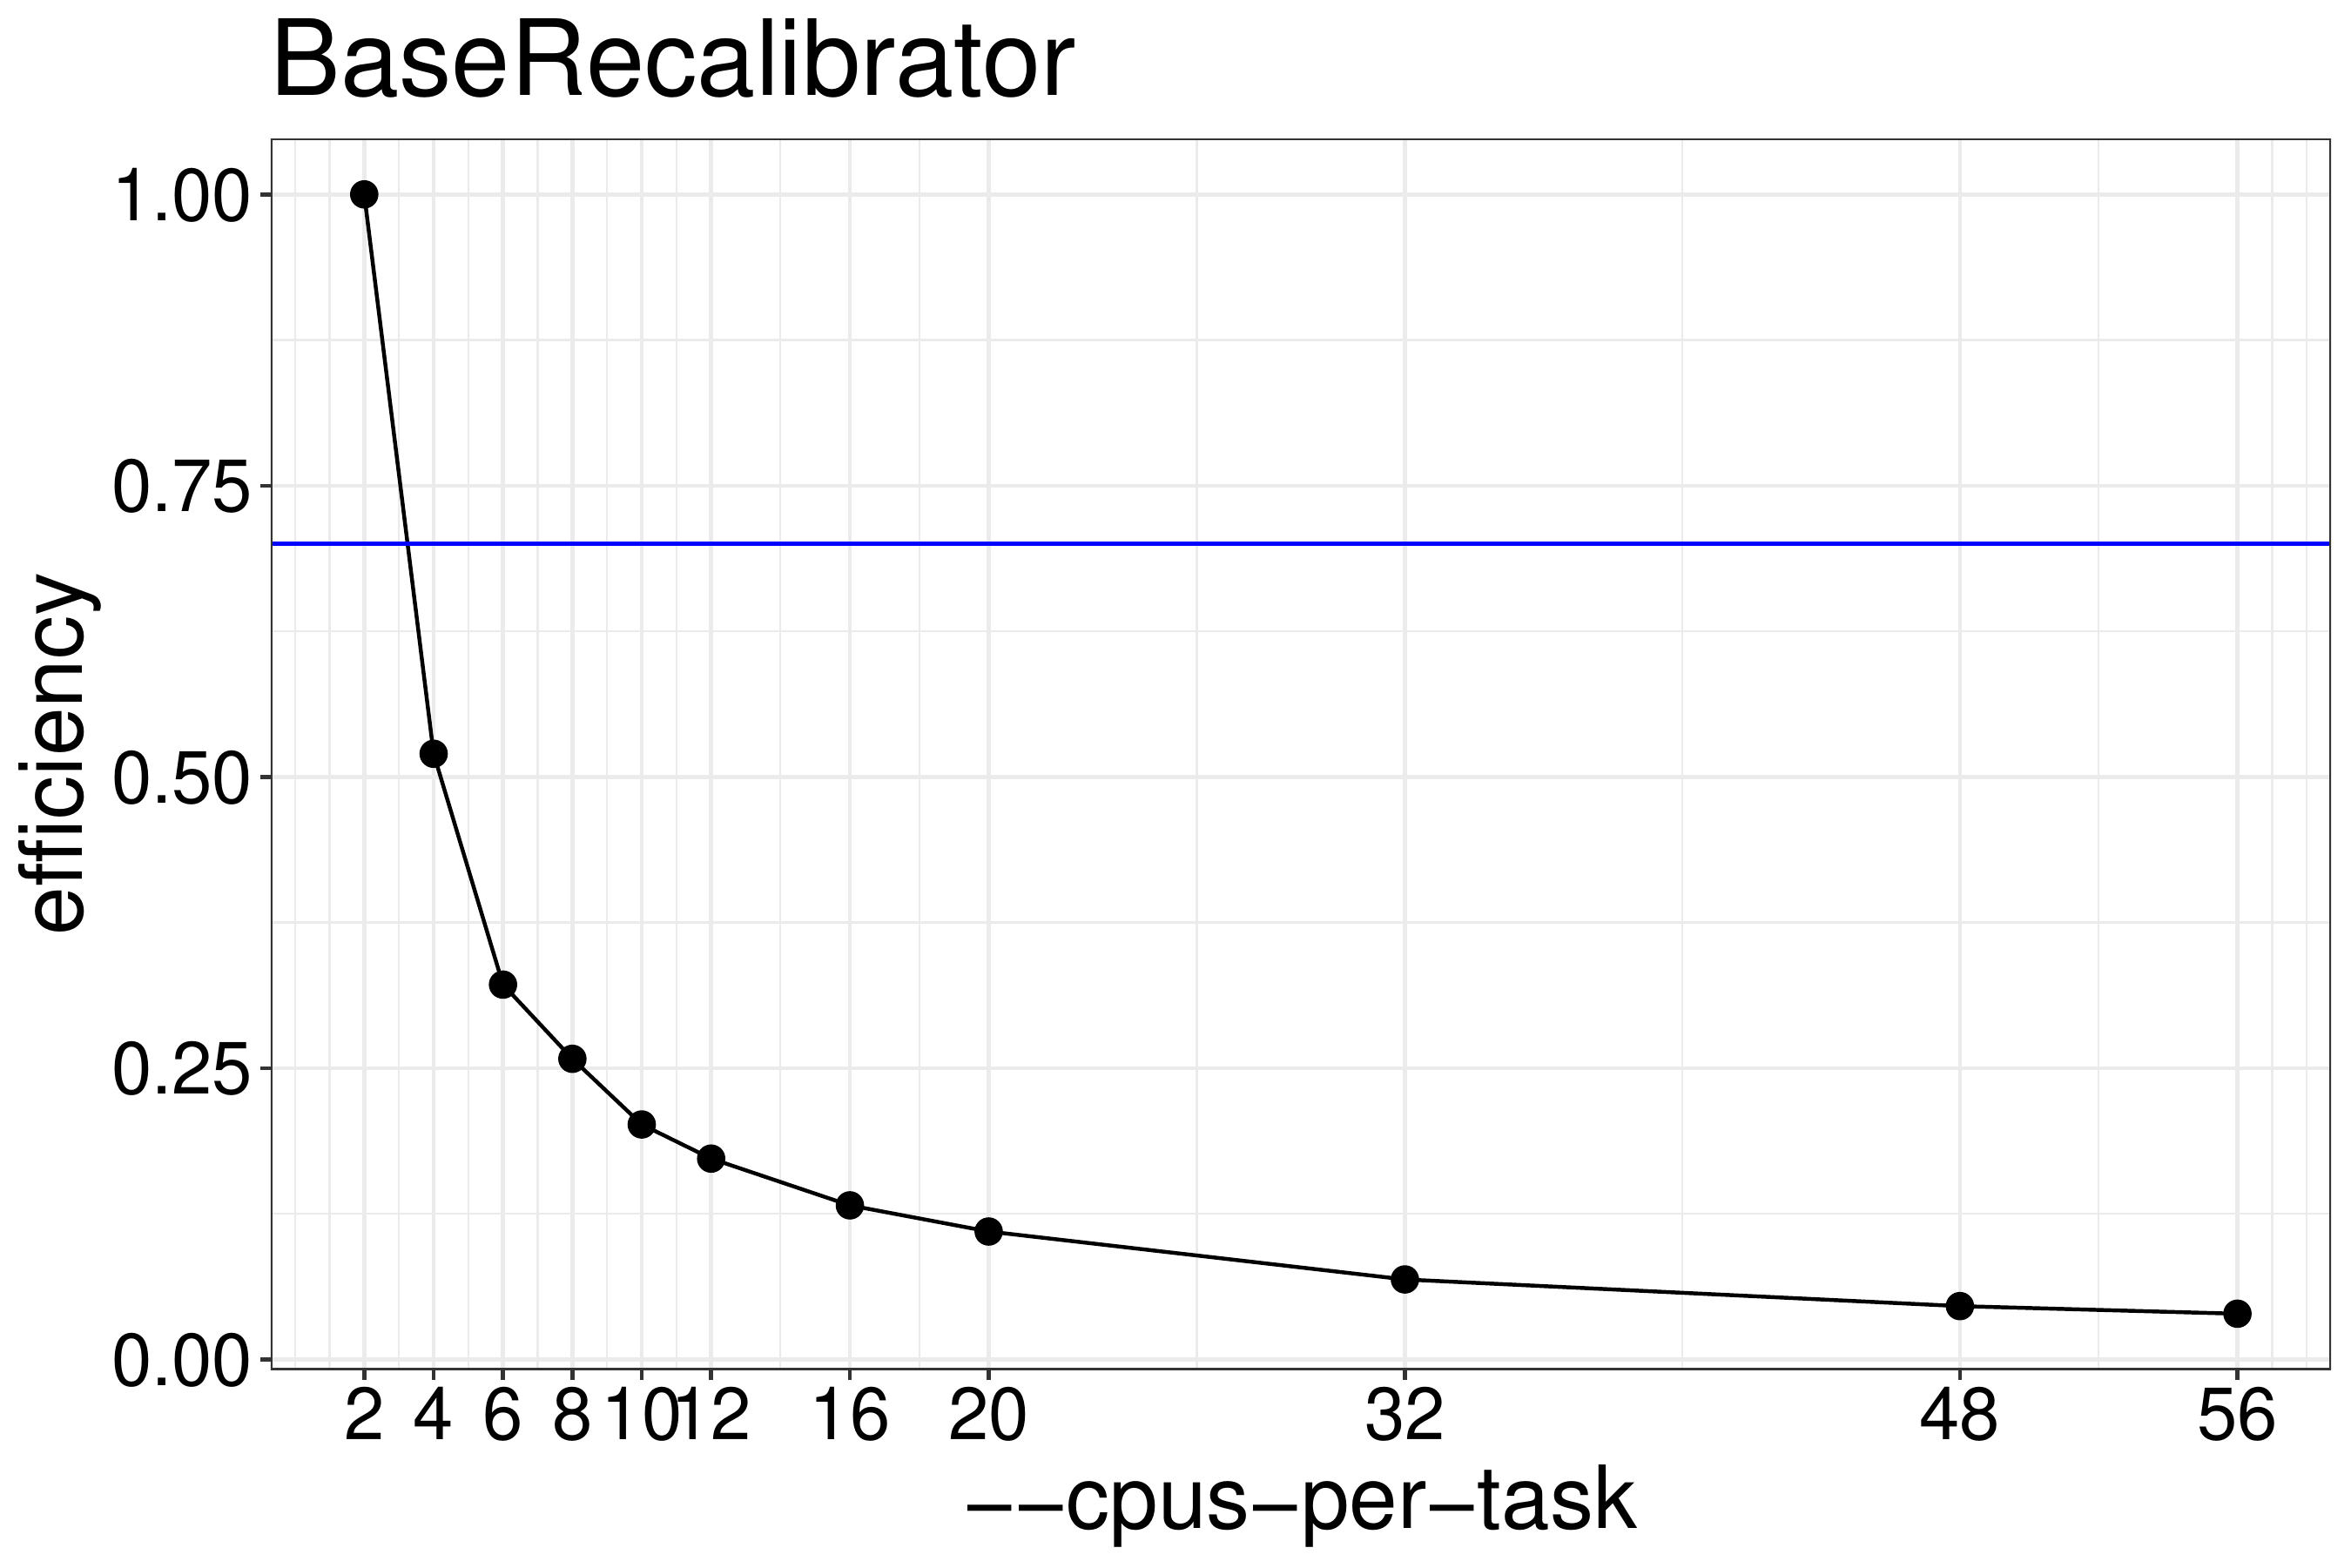 BaseRecalibrator efficiency calculated from runtimes